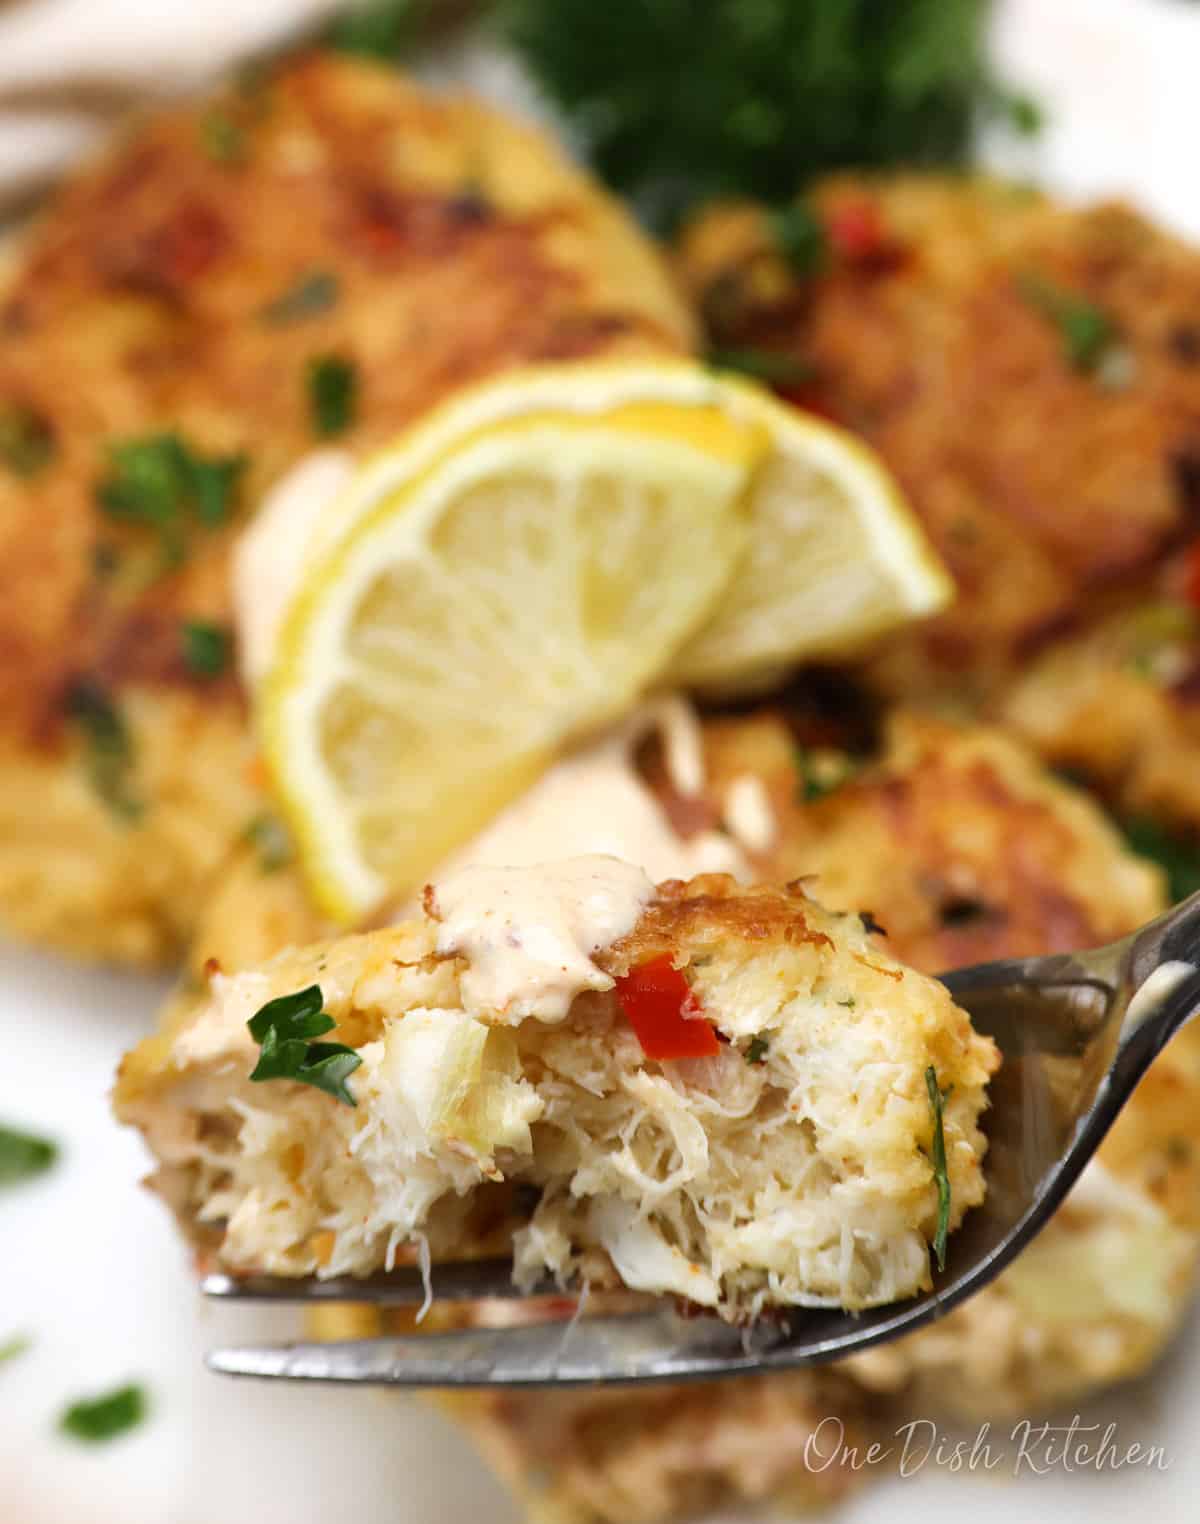 a part of a crab cake on a fork.